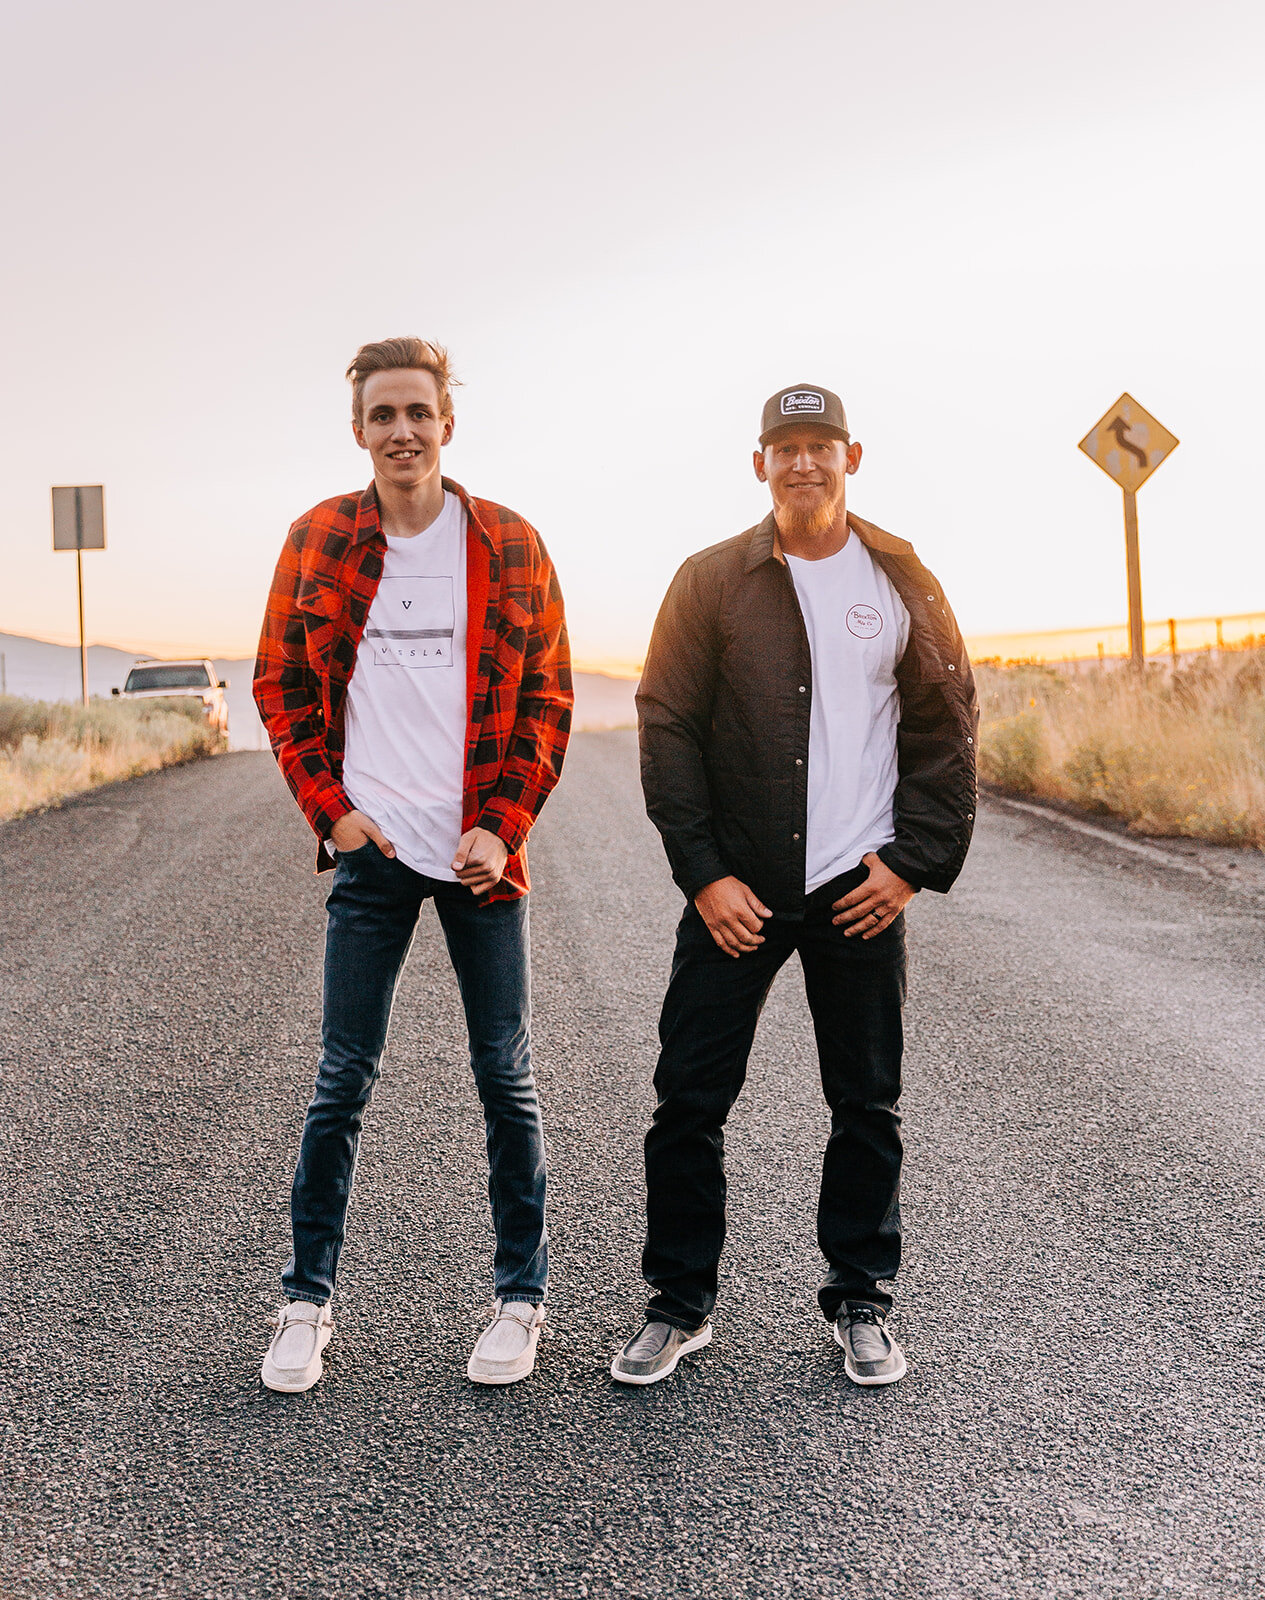  men standing in the road male models white tees with red and black plaid button up top and leather jacket baseball cap men’s clothing fashion shoot photos by bella alder photography northern utah commercial photographer in cache valley online clothi